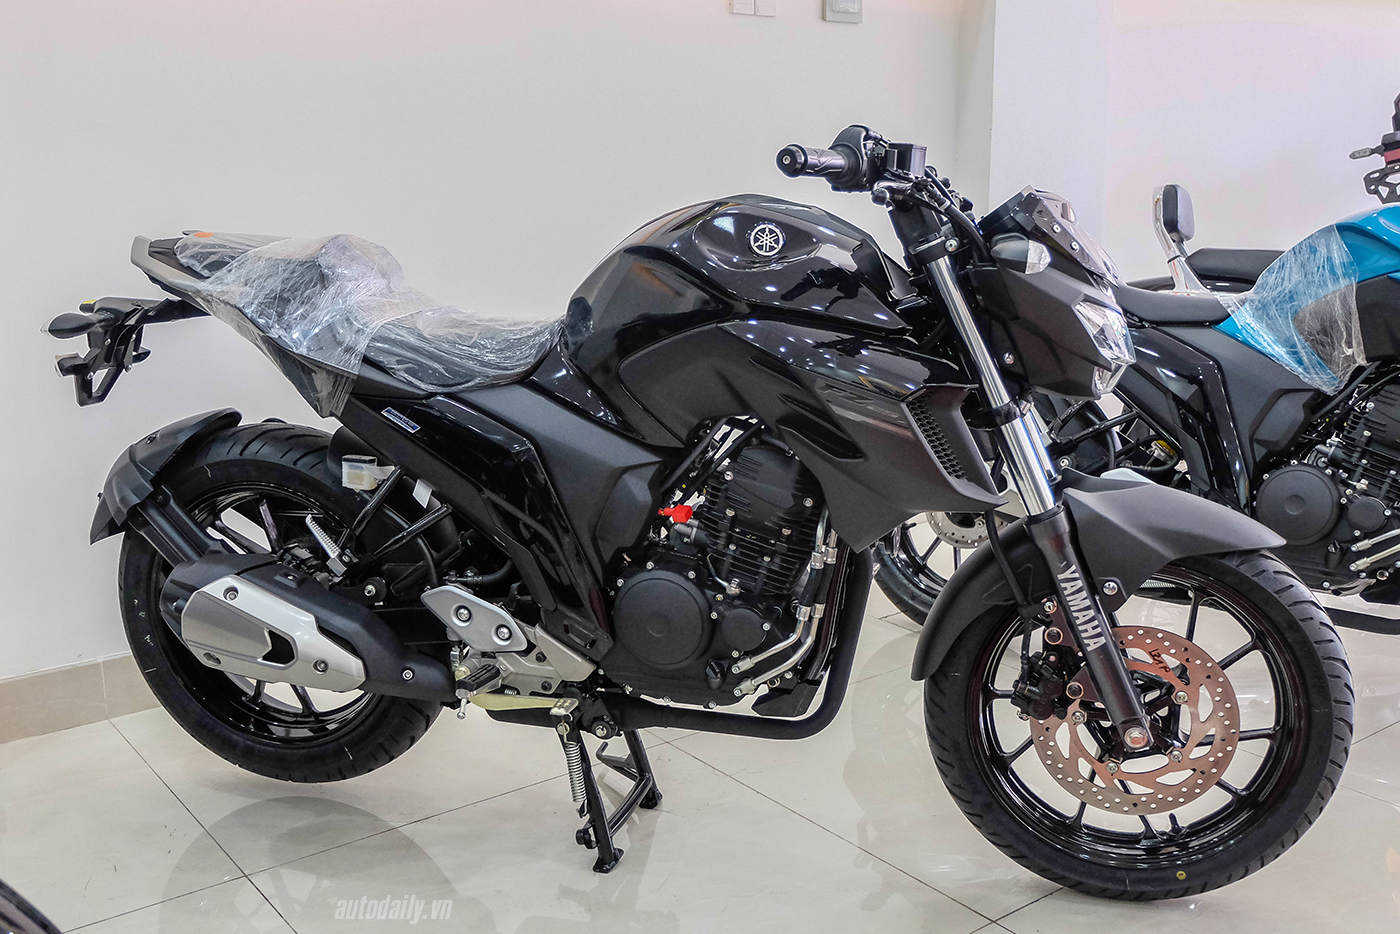 Yamaha FZ 25 Price in Nepal | Bike Specs and Features 2021